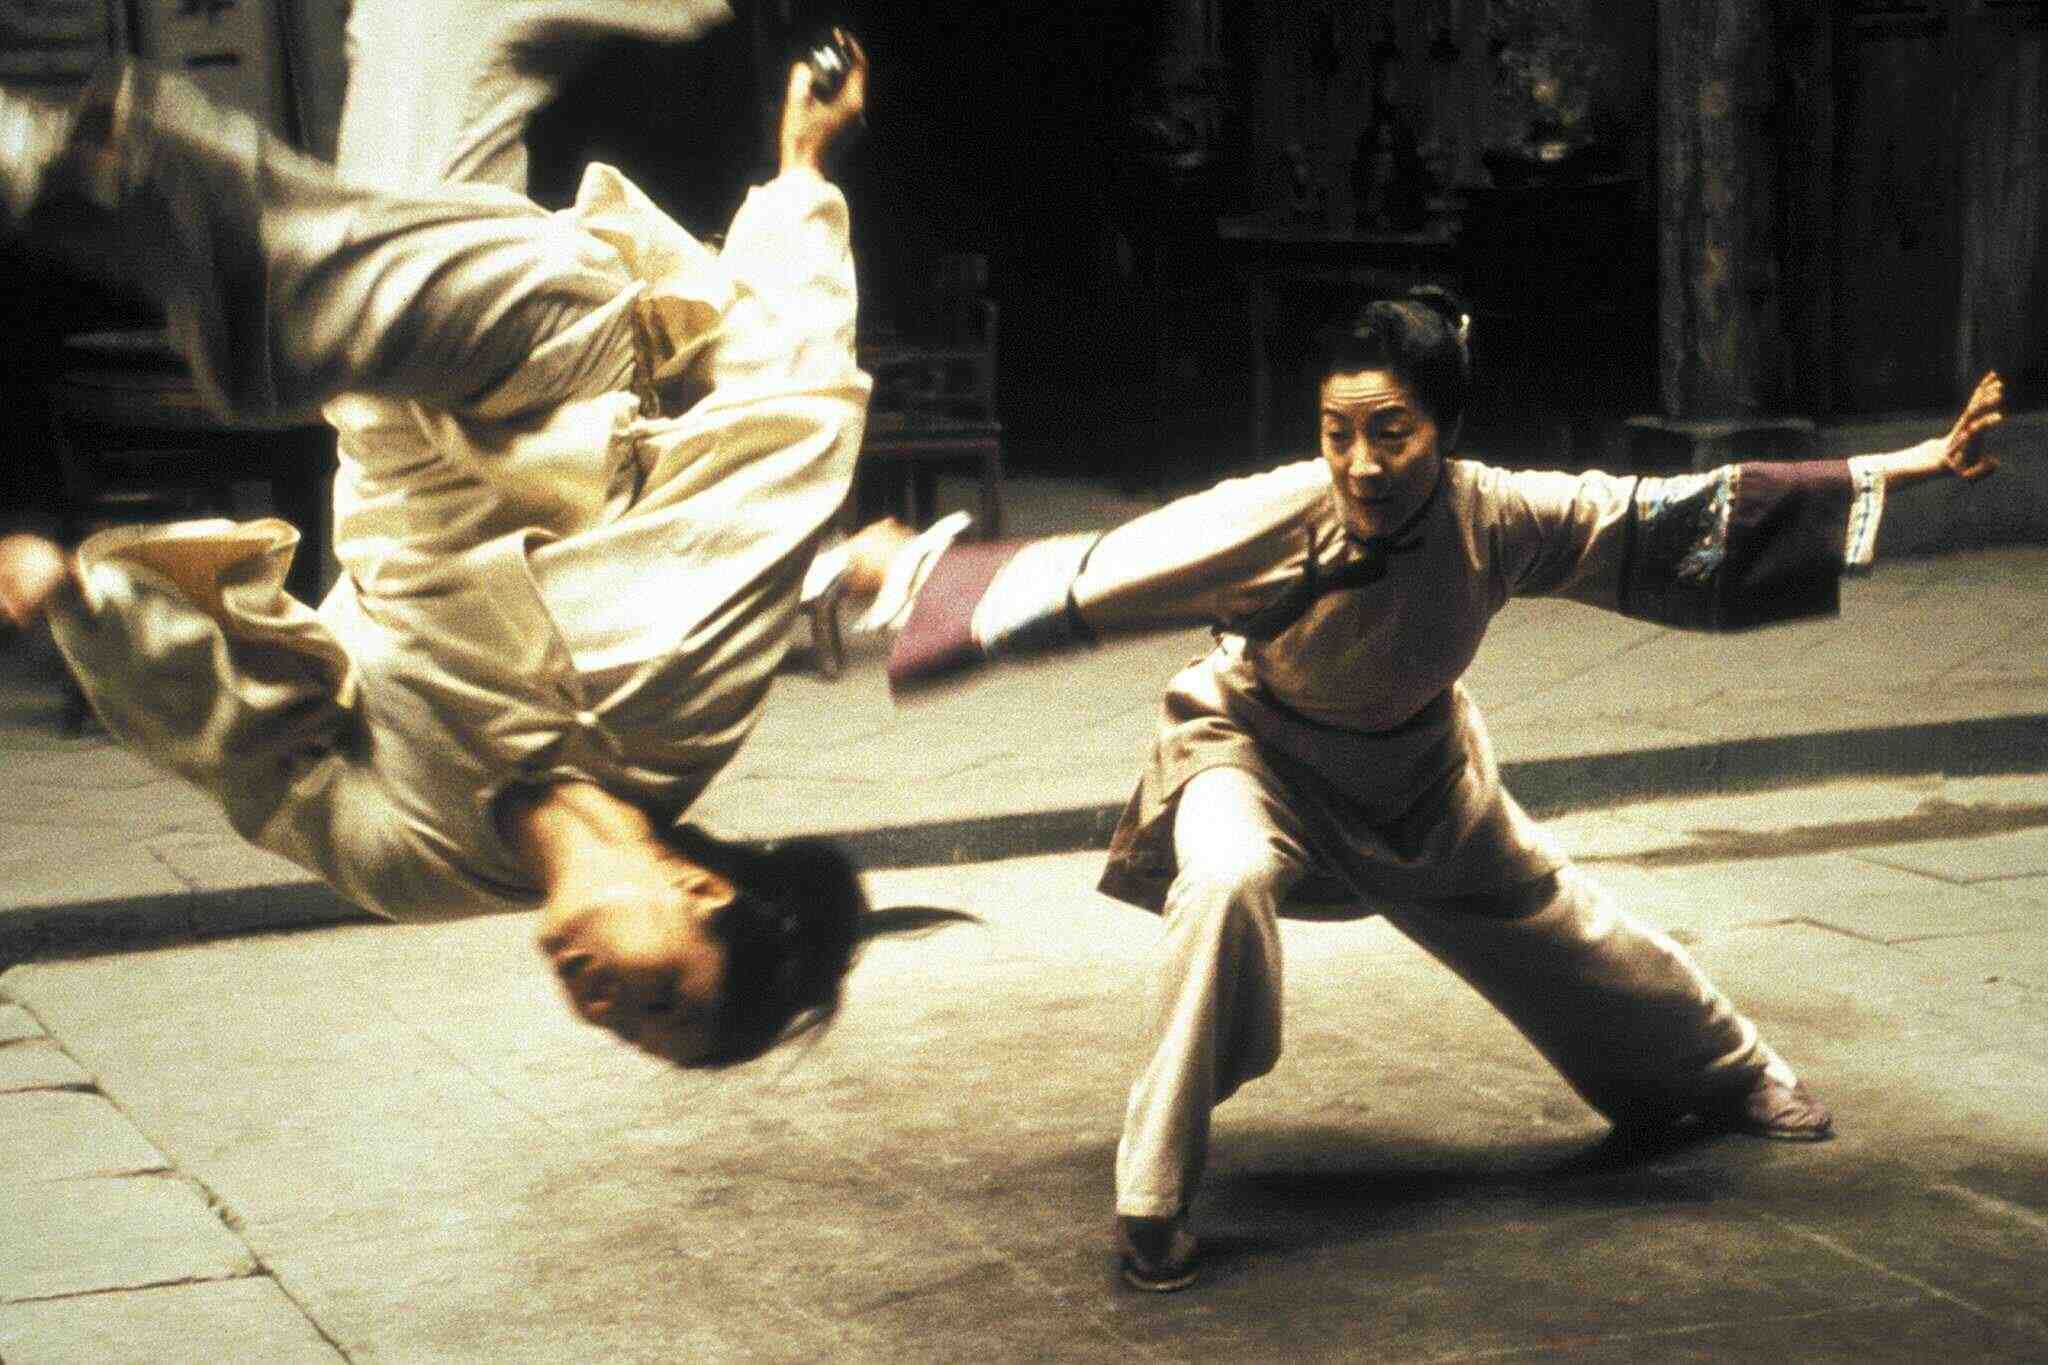 Does real kung fu exist?